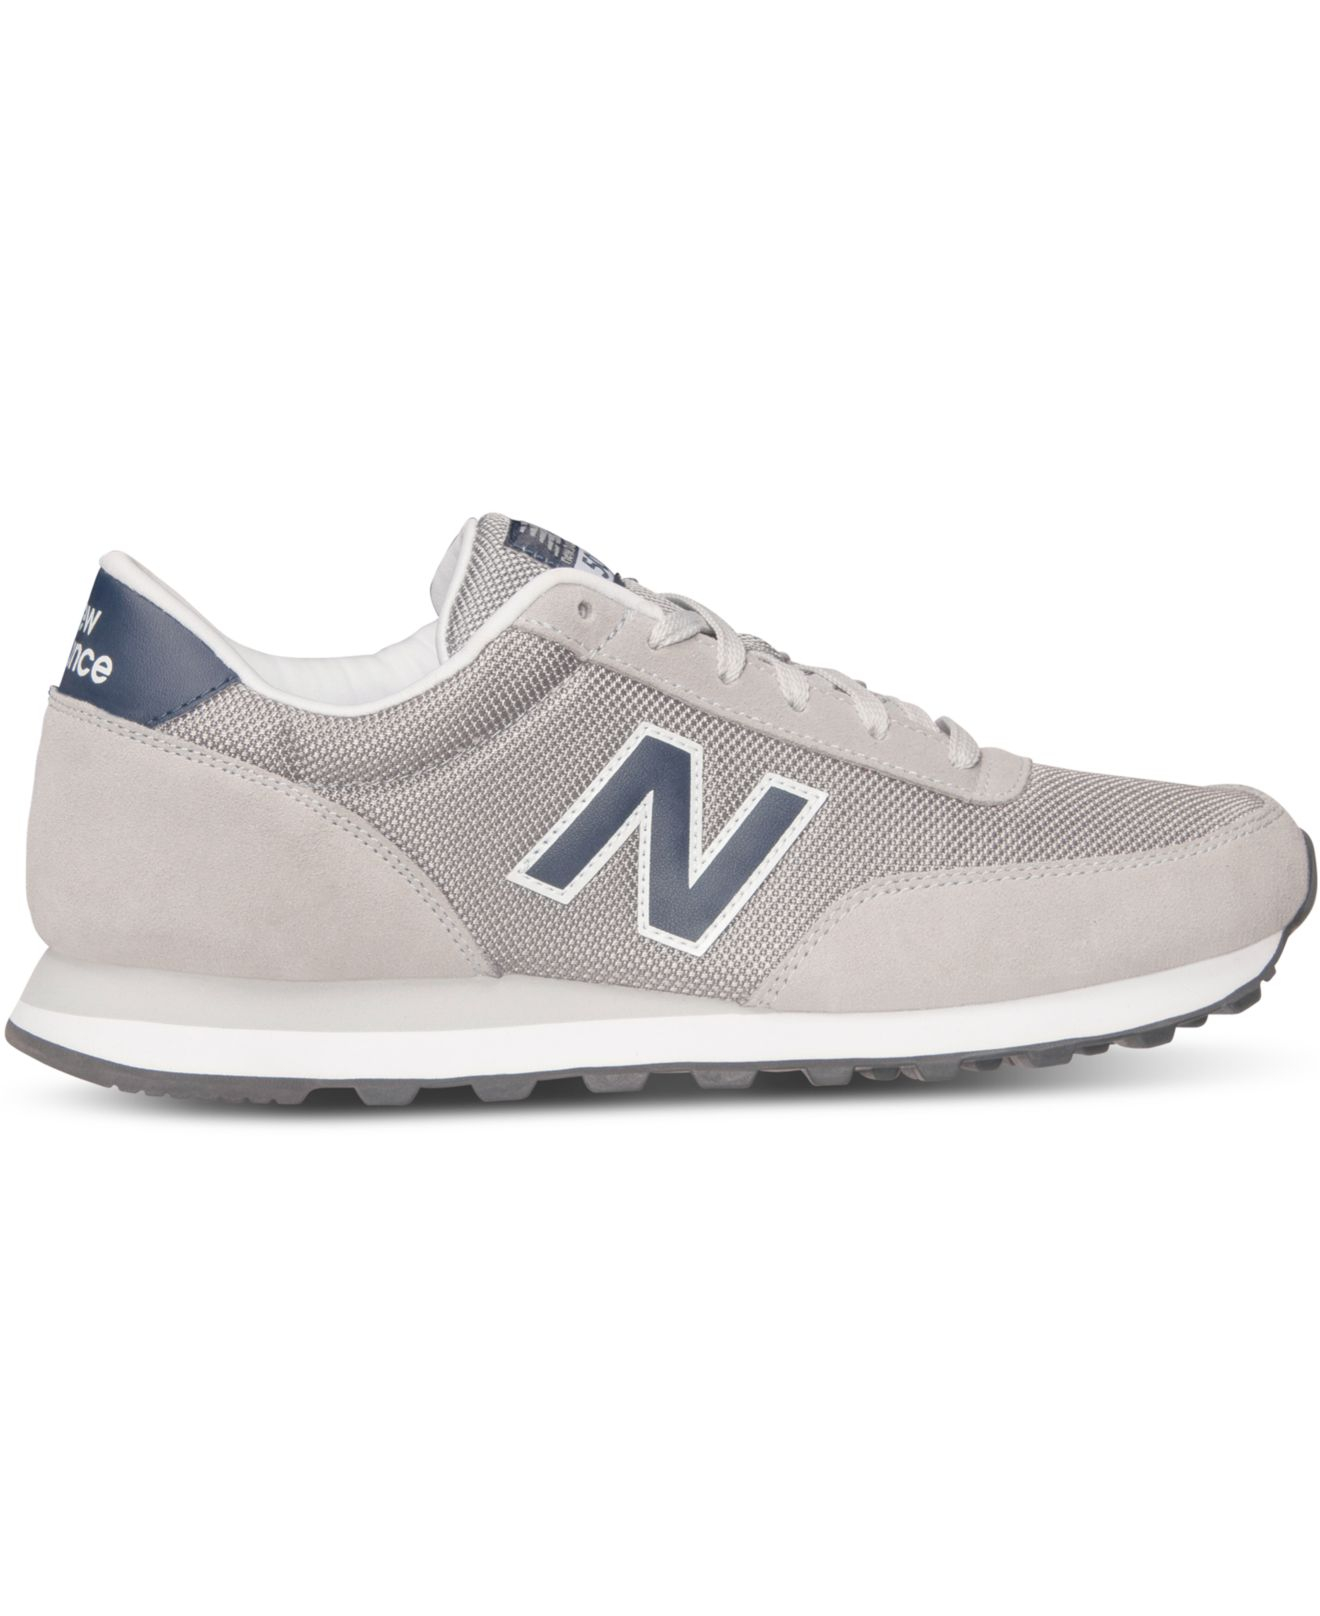 Lyst - New Balance Men'S 501 Casual Sneakers From Finish Line in Blue ...